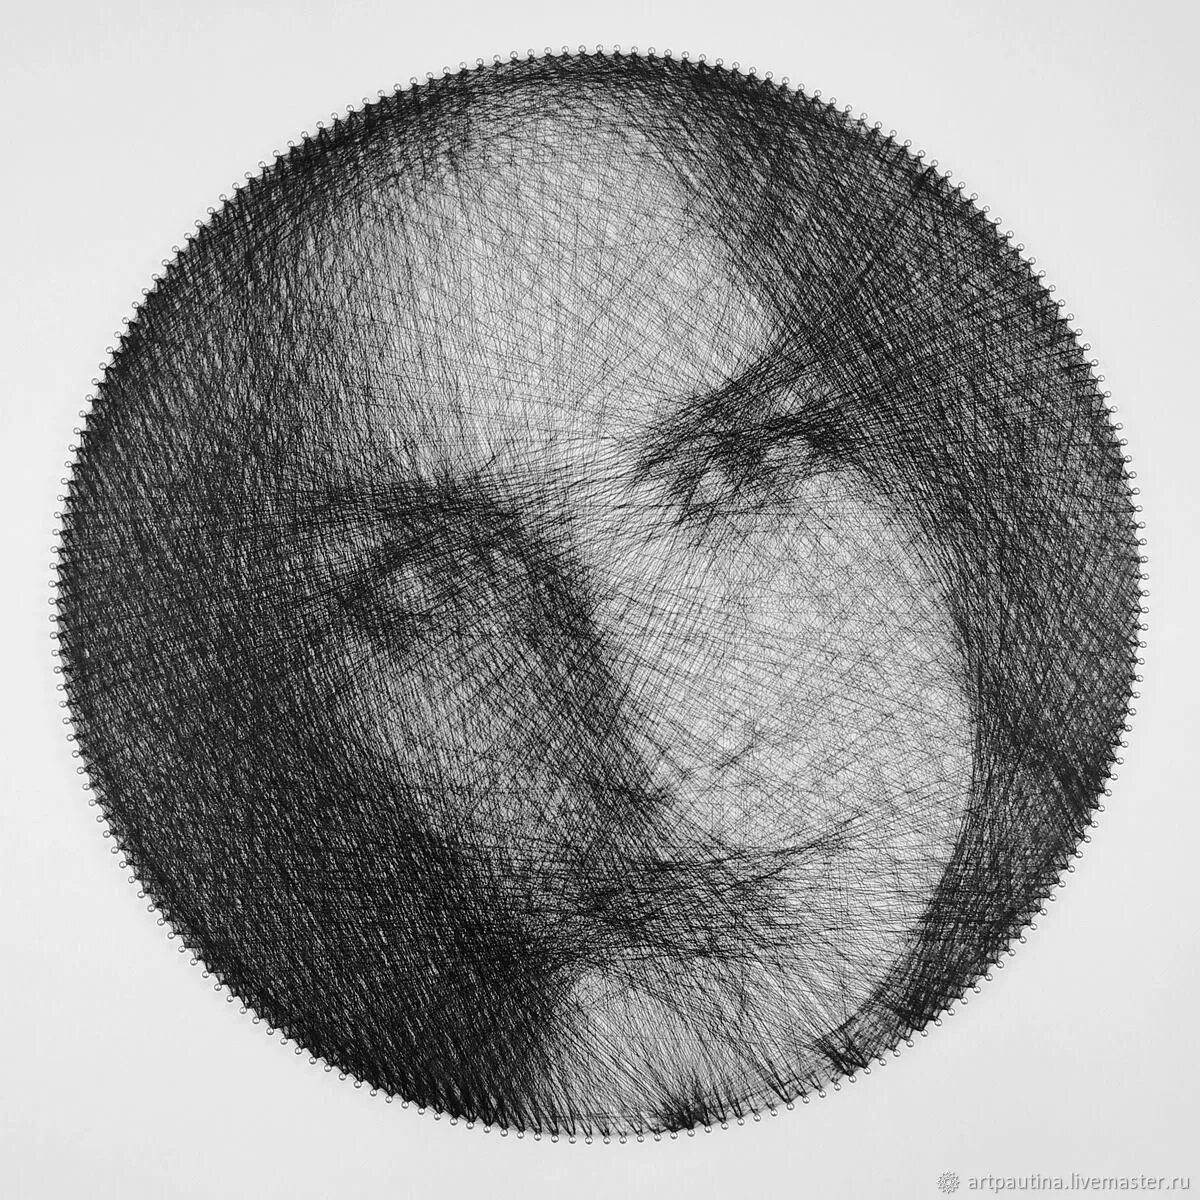 An alluring circular portrait from a photograph